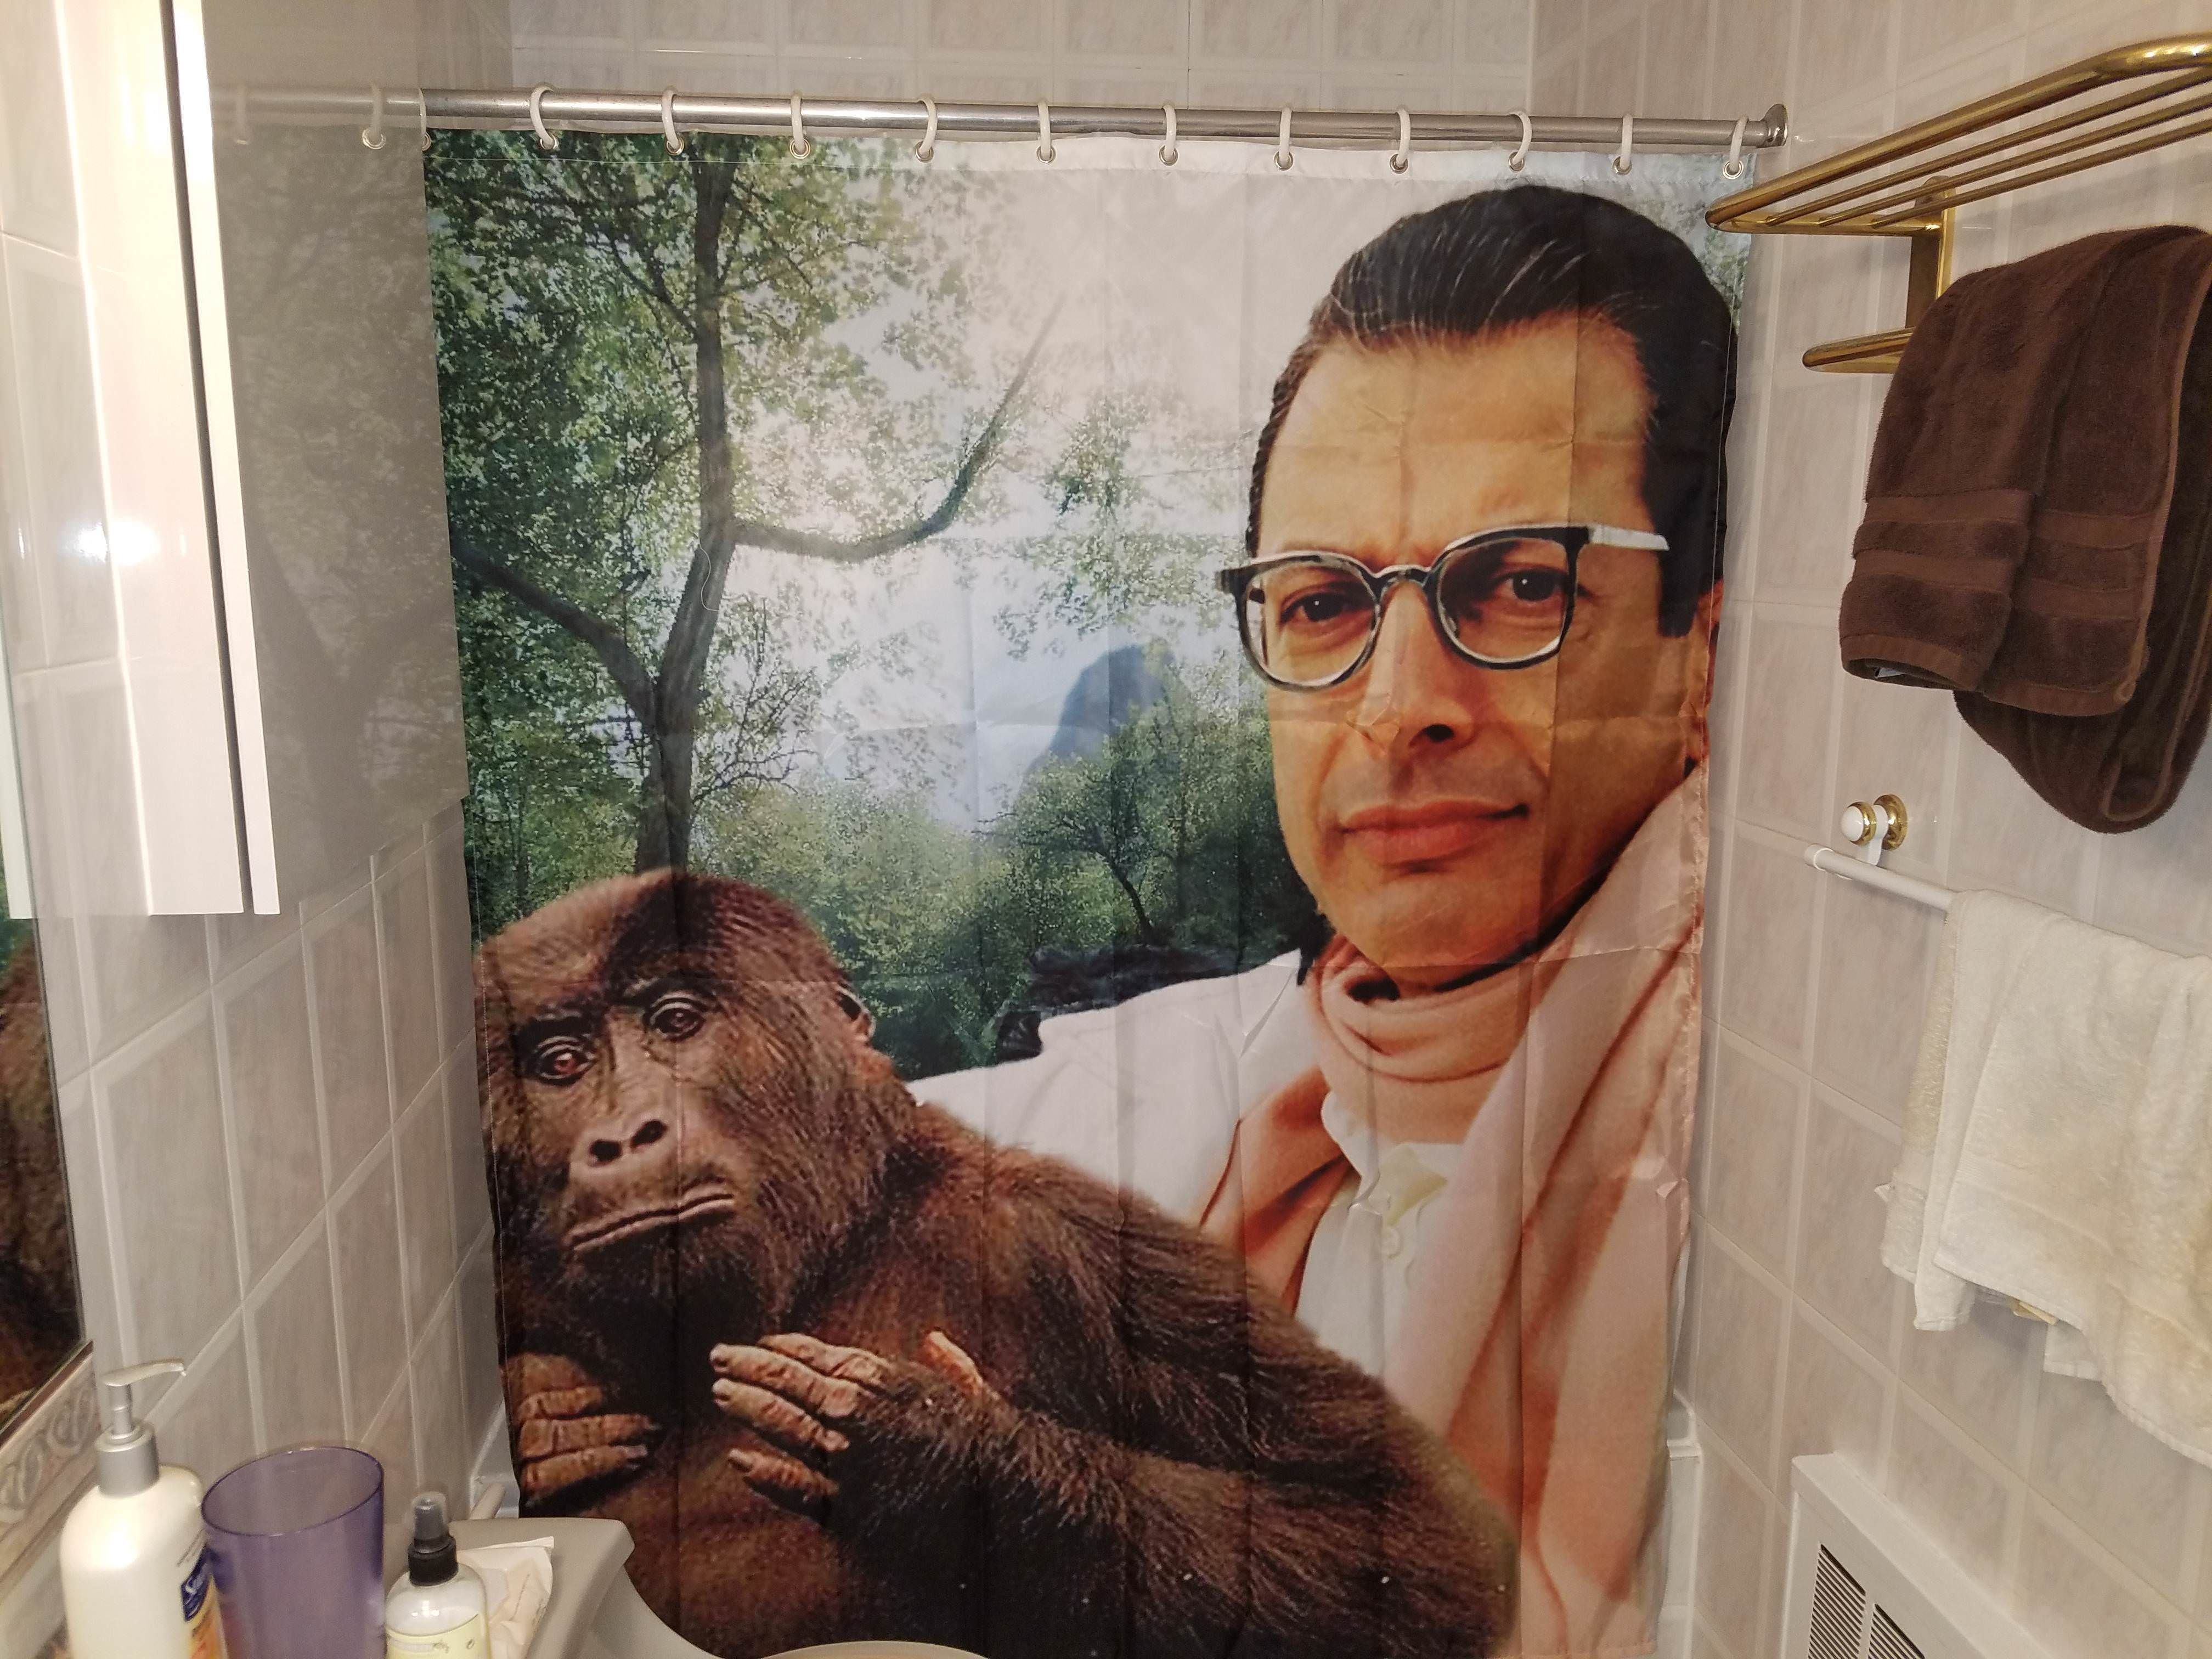 So we got a new shower curtain...